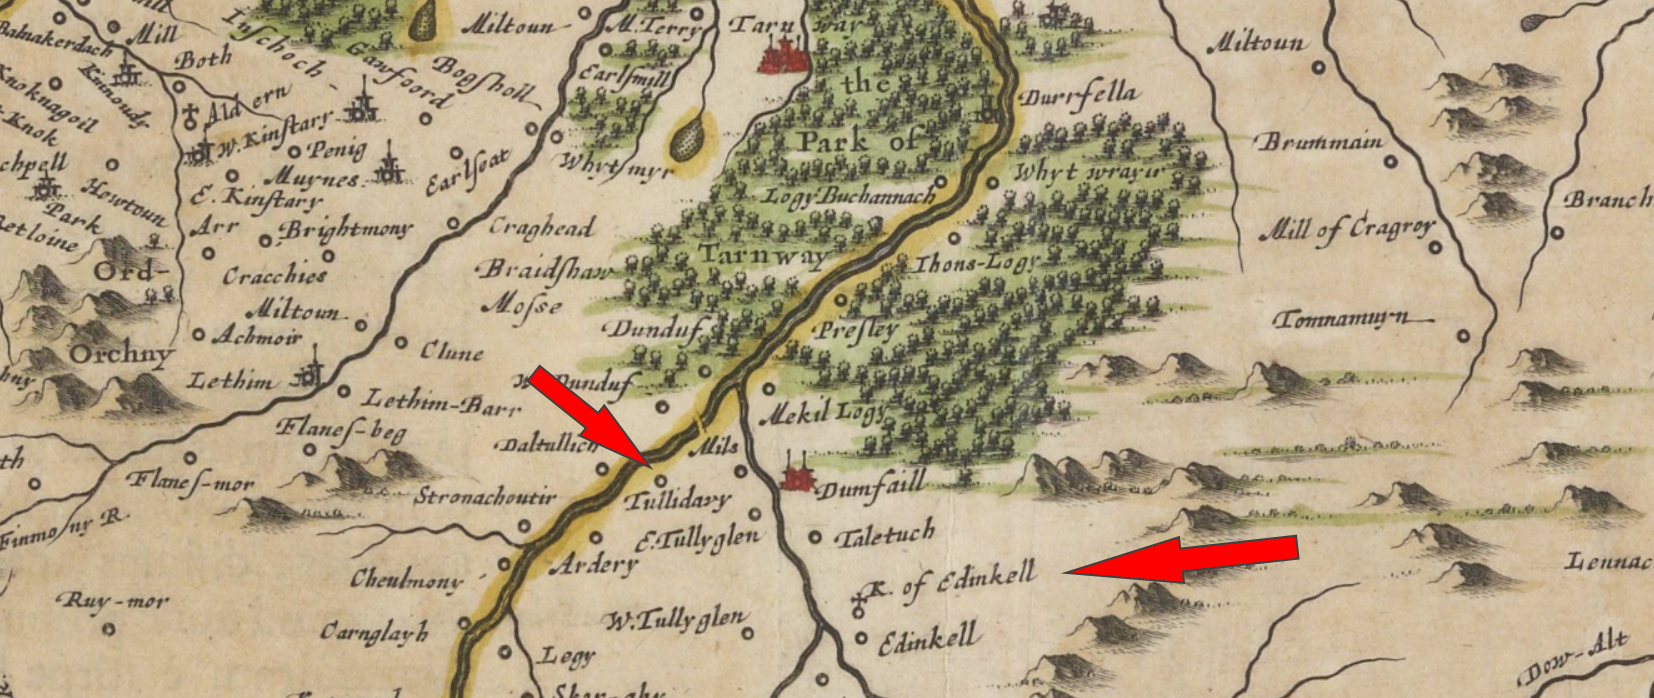 Map showing the locations of Tullidivy and the Kirk of Edinkillie in 1654.